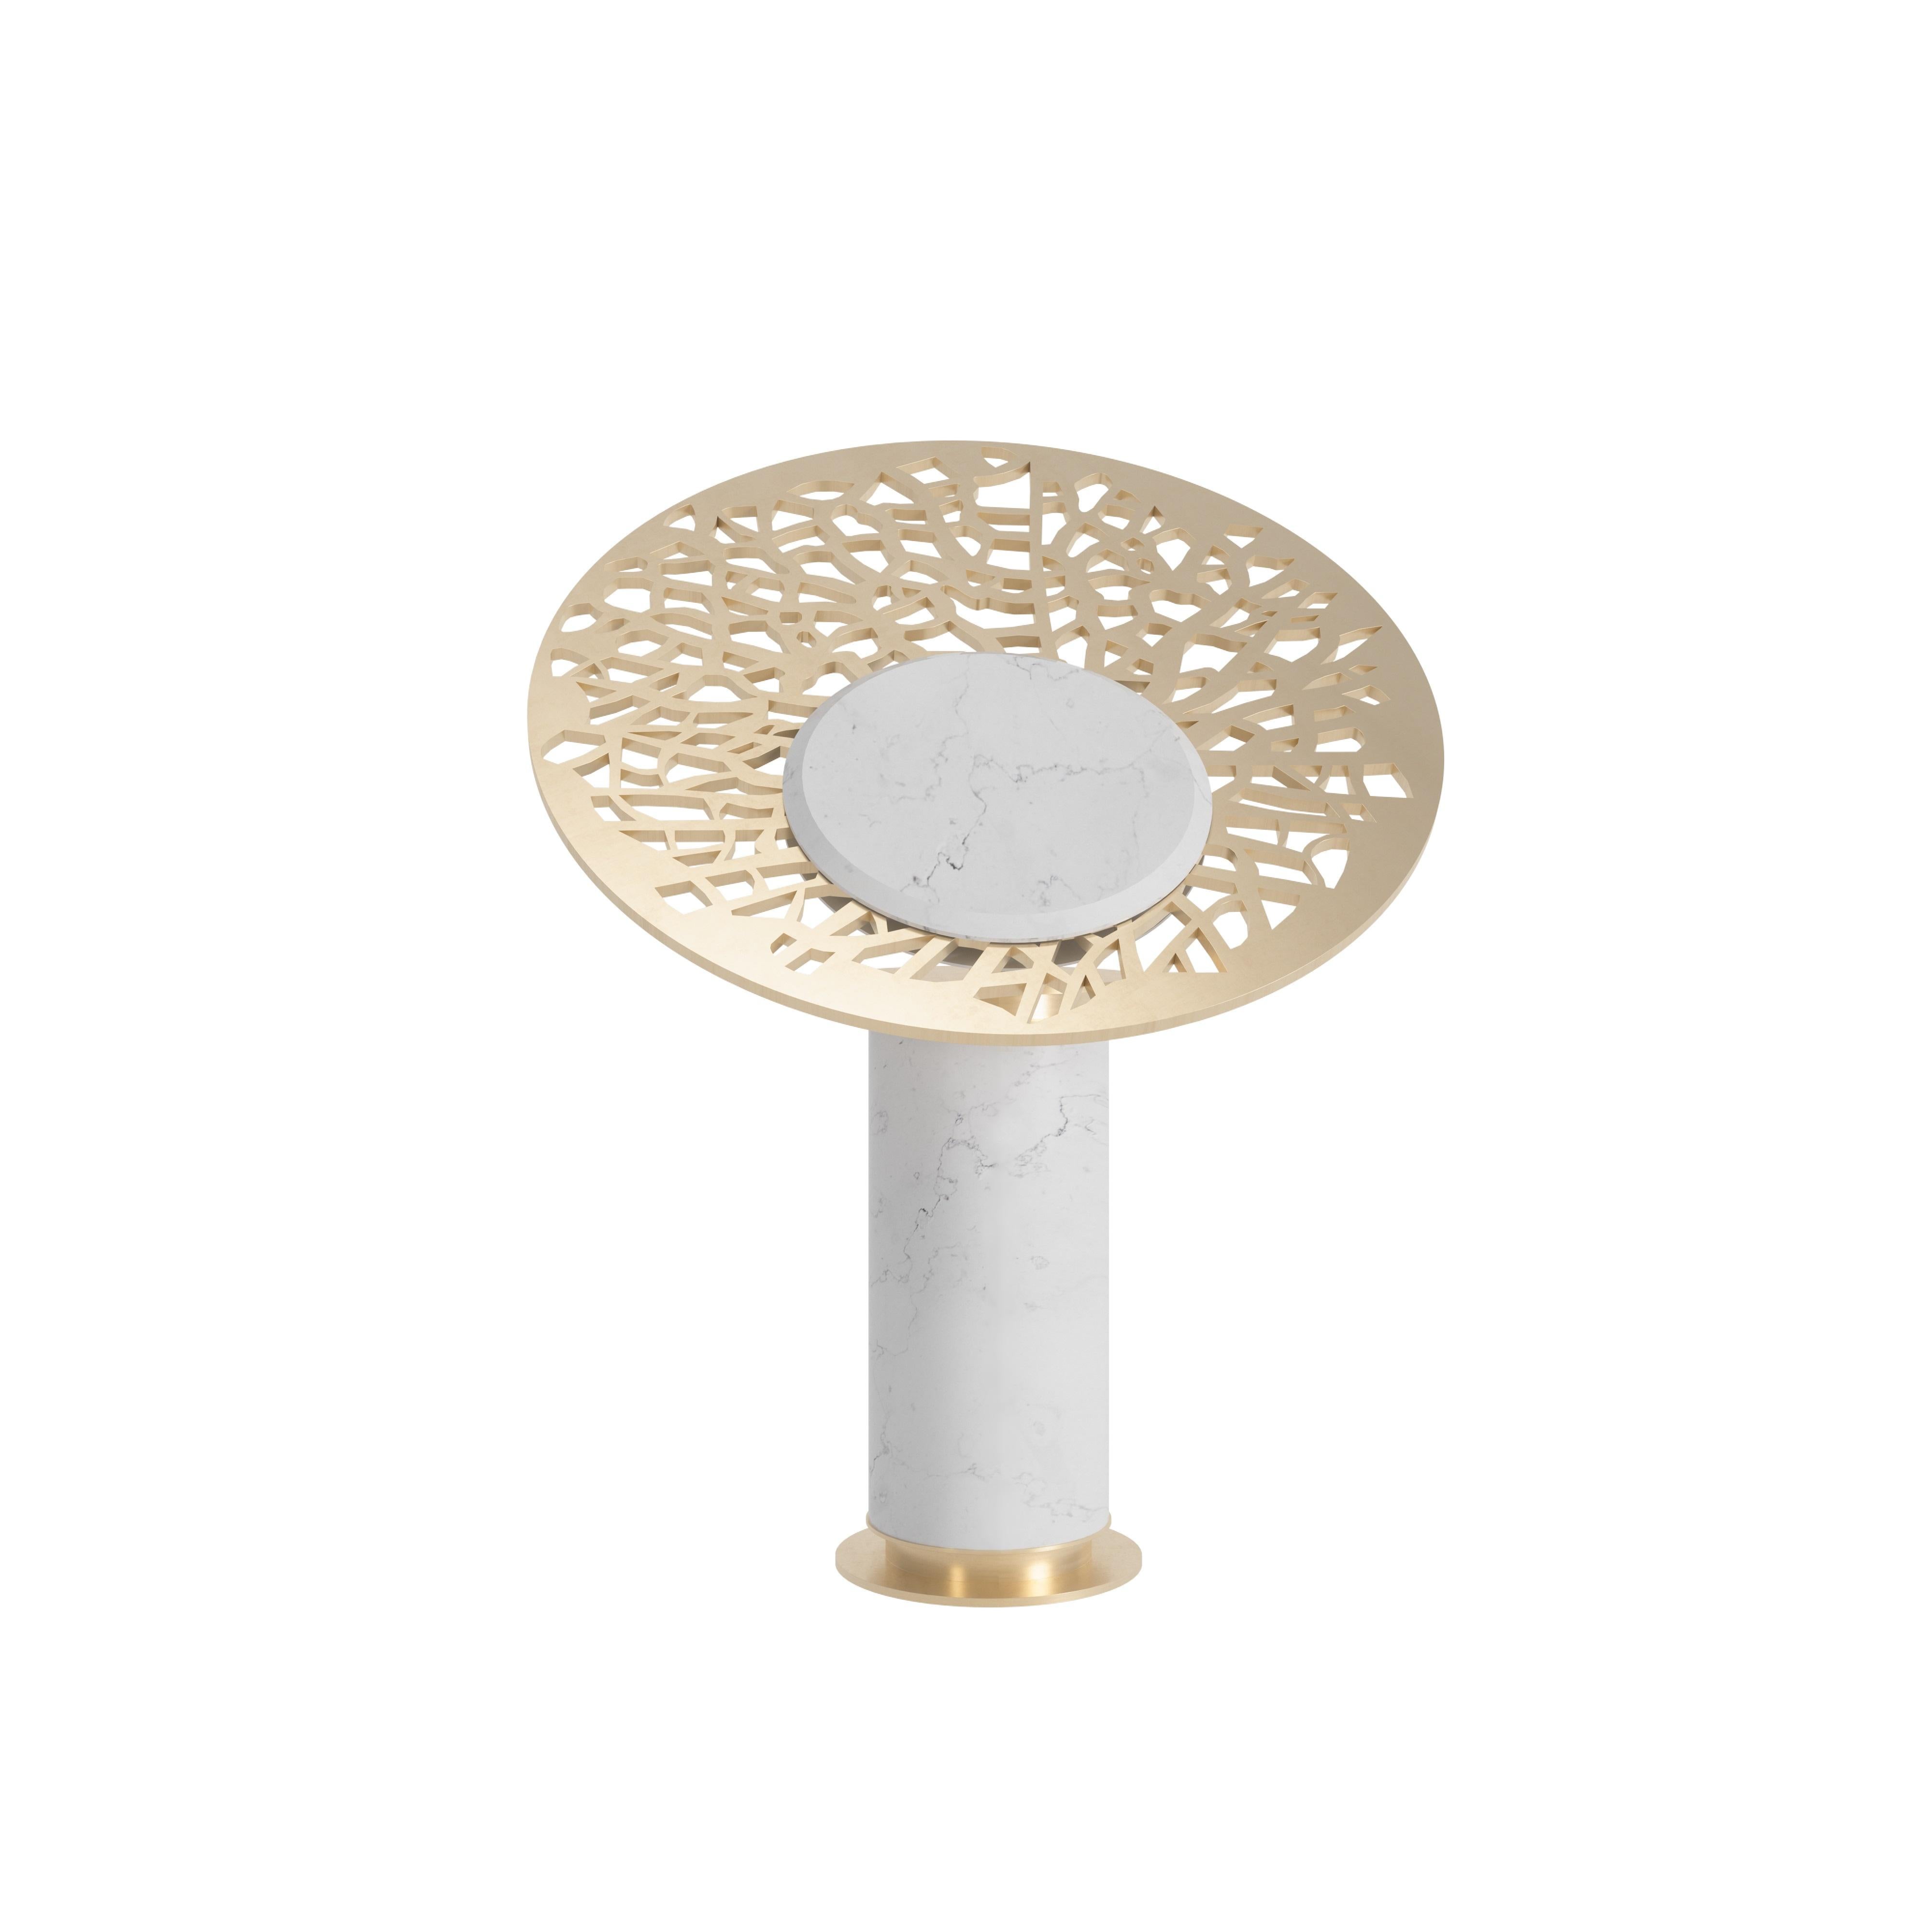 Oddysey Table Lamp by Memoir Essence
Dimensions: D 45 x W 45 x H 56 cm.
Materials: Brushed brass and white marble.

Odyssey Table Lamp is the new addition to Memoir’s lighting collection. Combining marble and brass round-shaped pieces into an